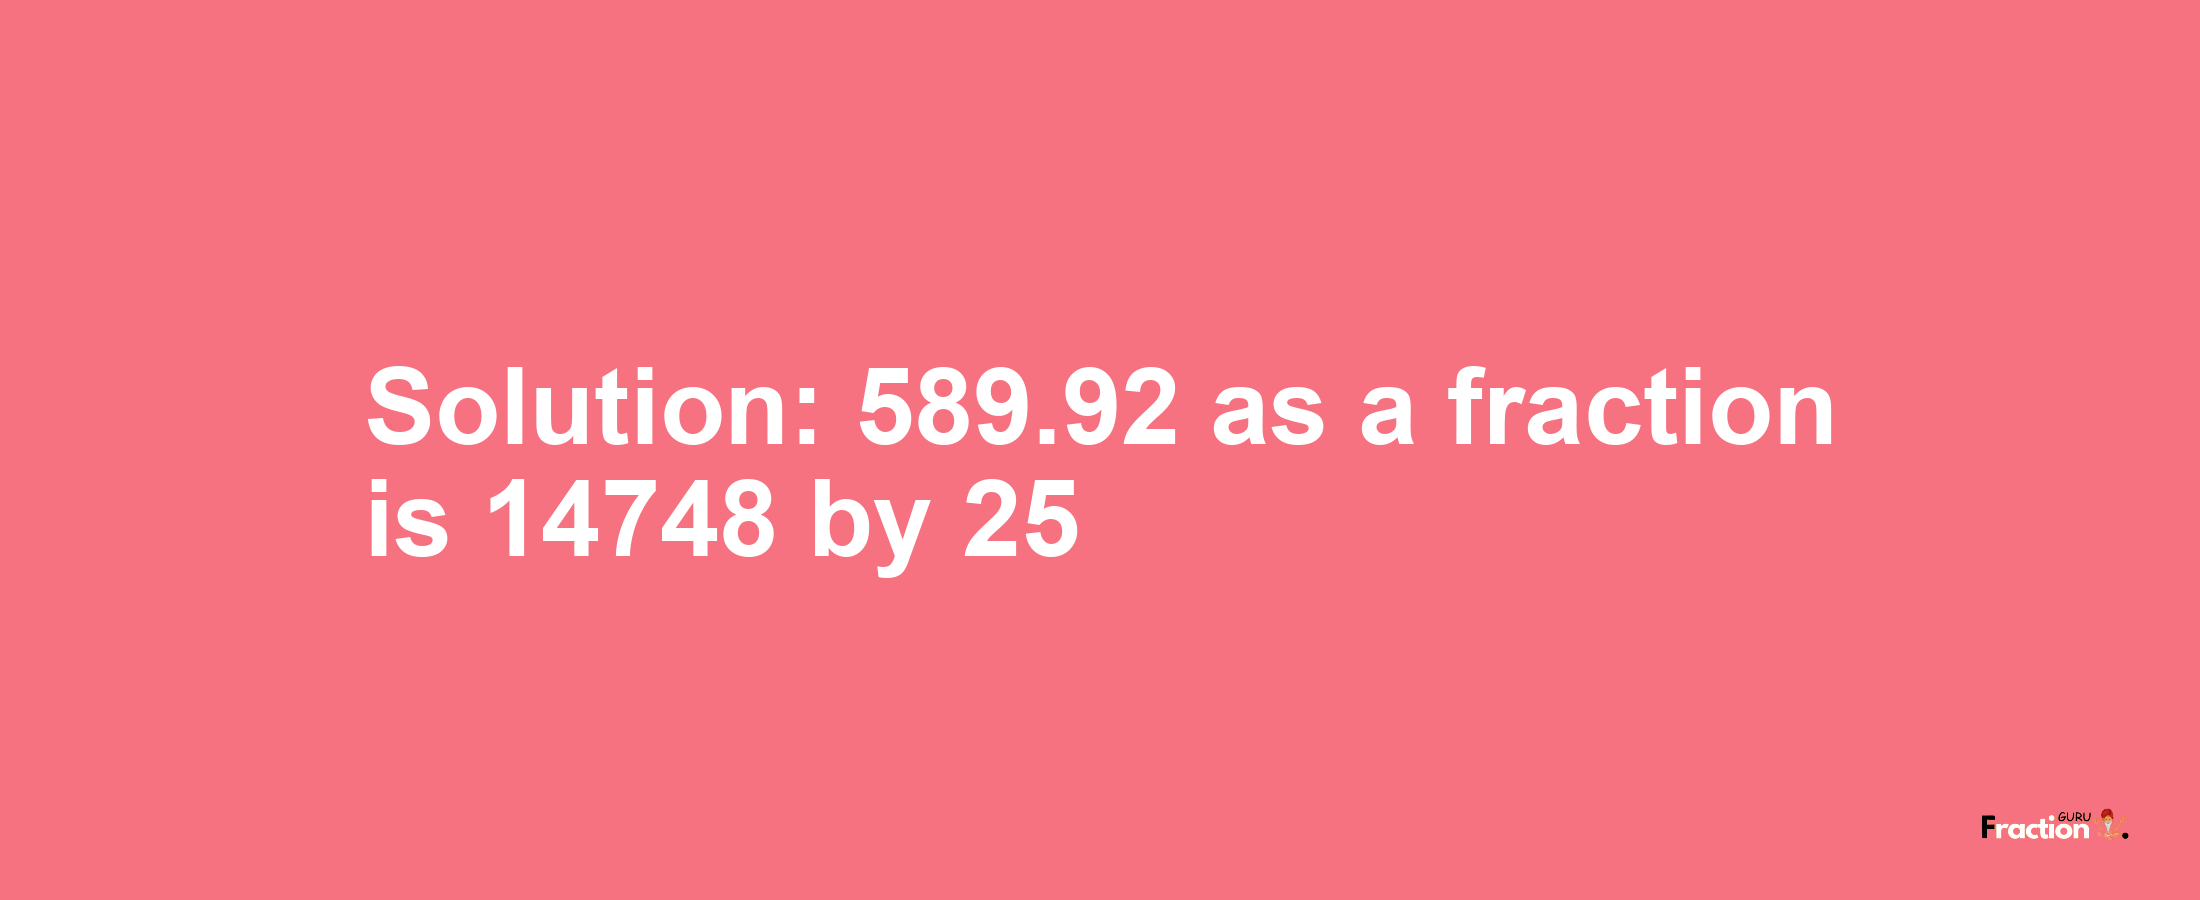 Solution:589.92 as a fraction is 14748/25